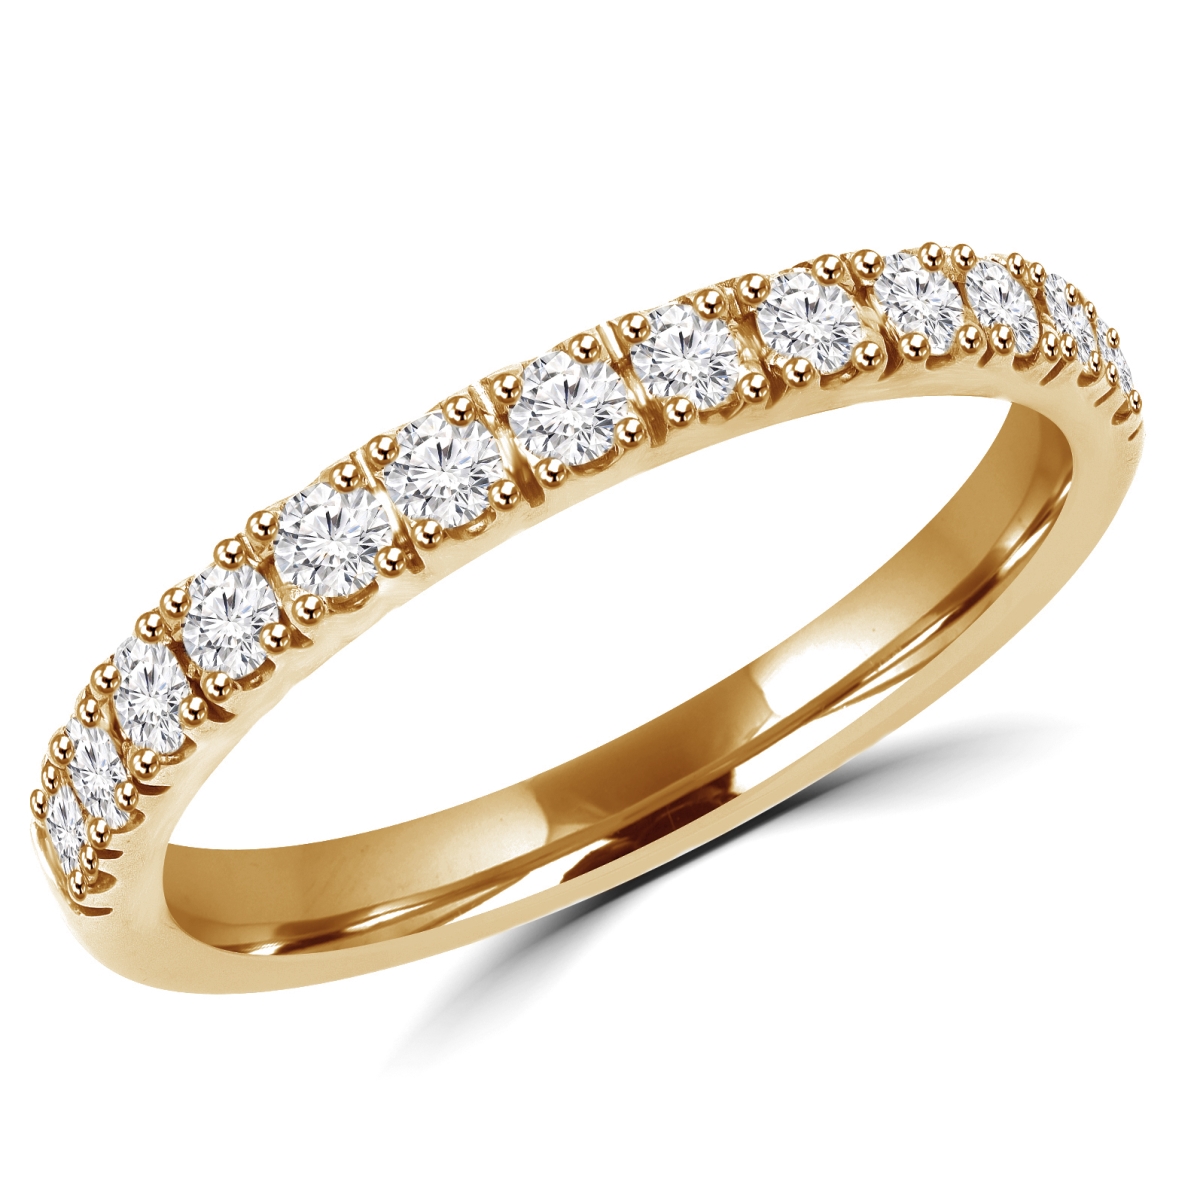 Picture of Majesty Diamonds MD180187-9 0.3 CTW Round Diamond Semi-Eternity Wedding Band Ring in 14K Yellow Gold - Size 9